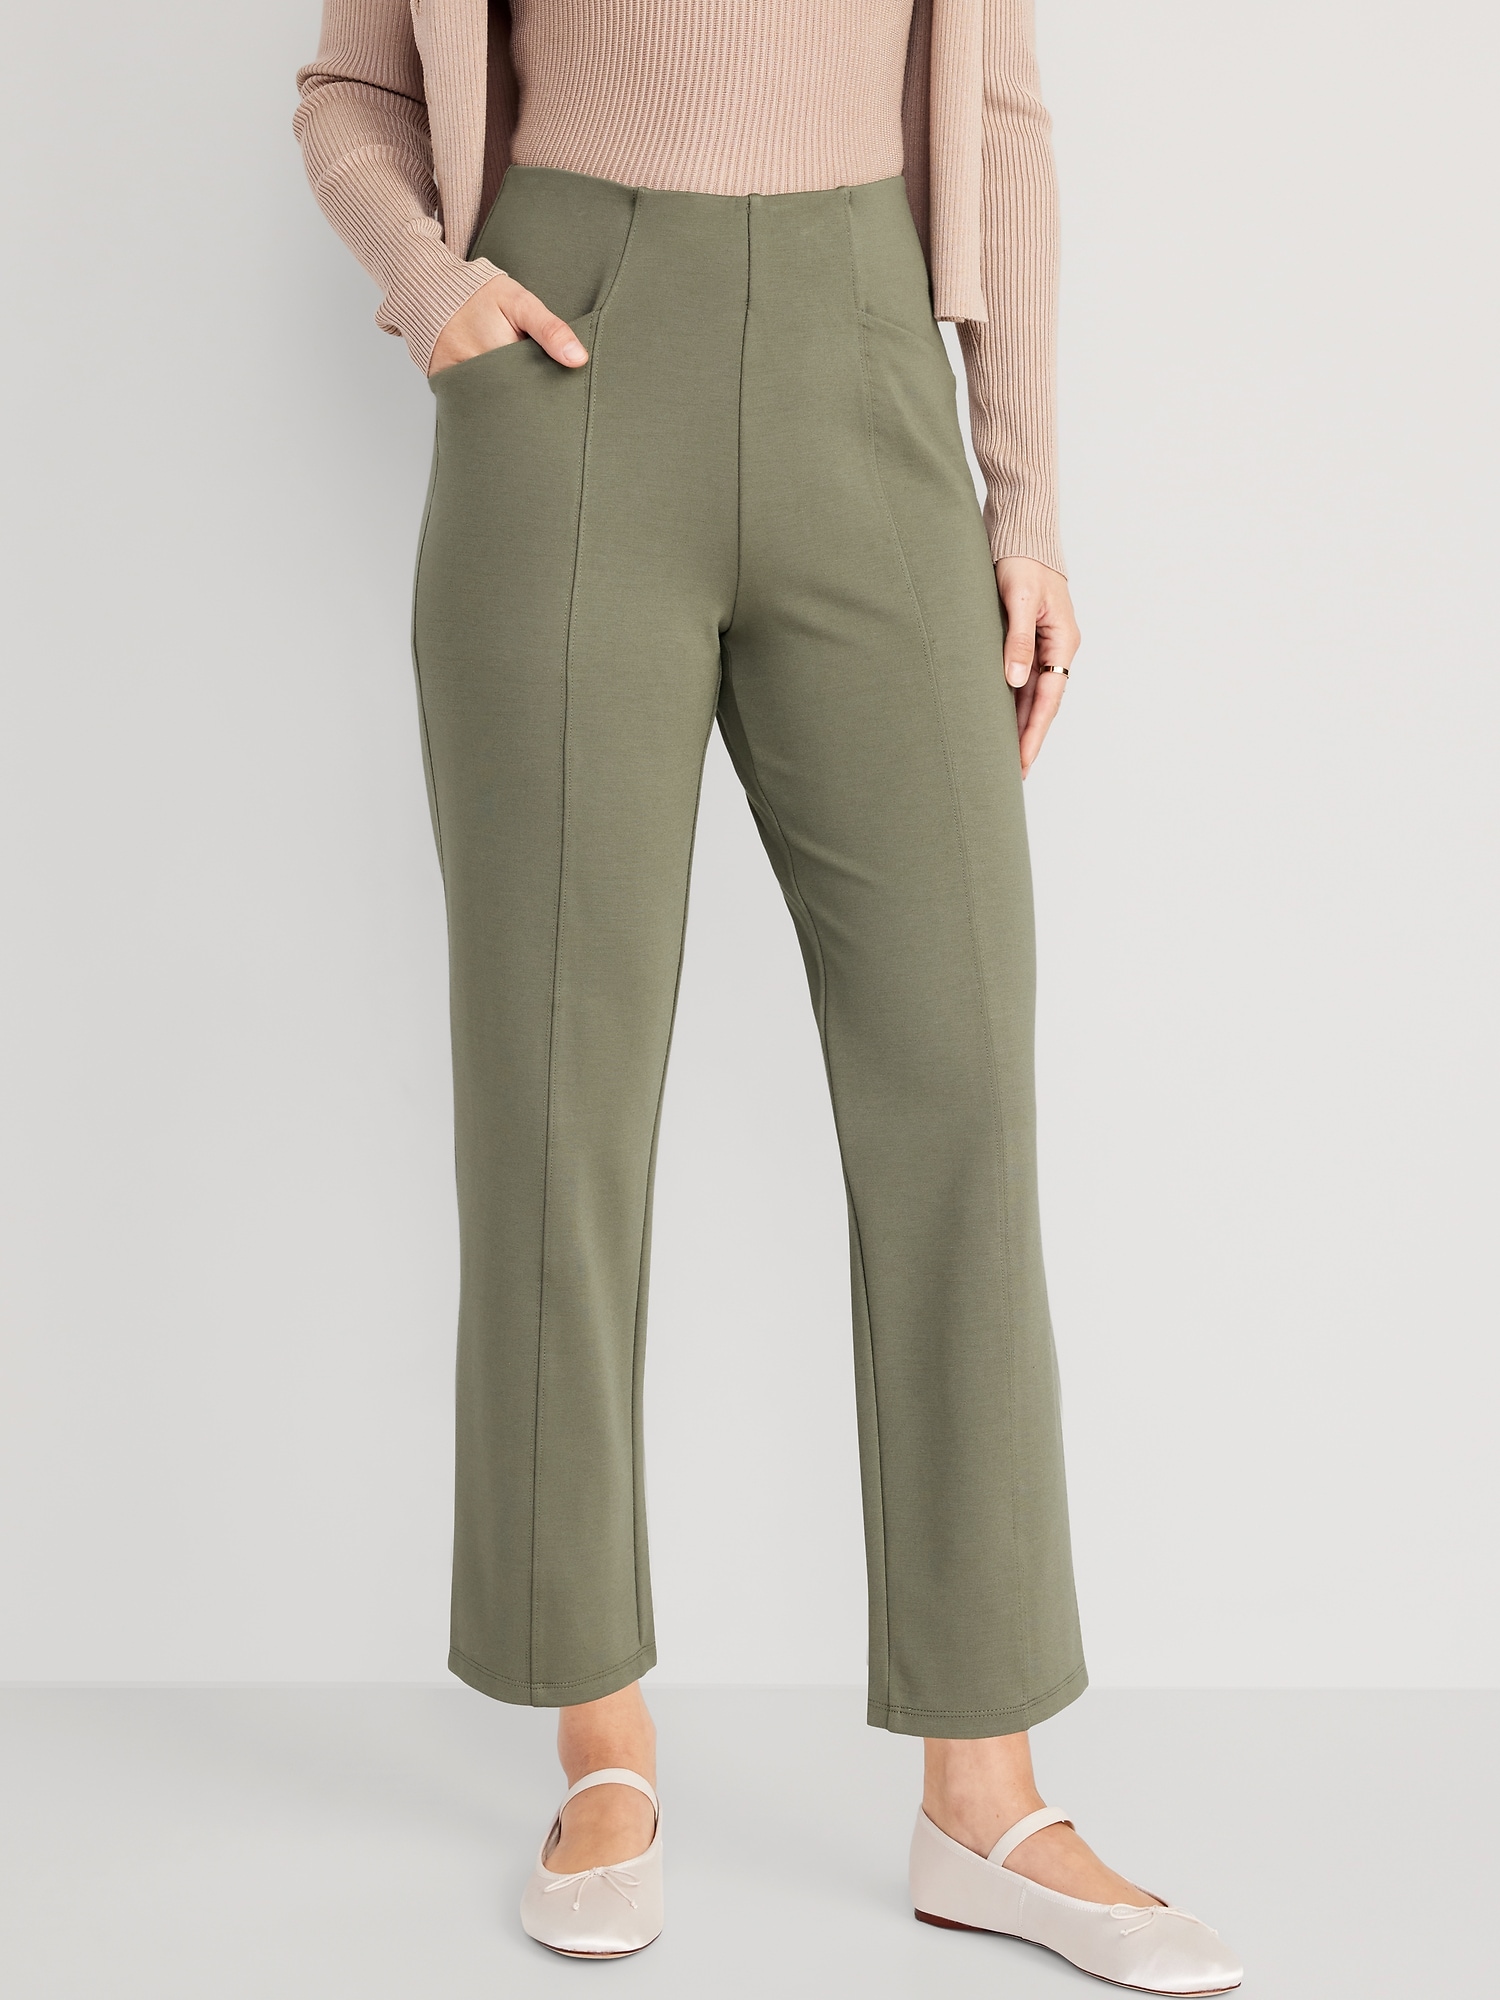 High-Waisted OG Straight Faux-Leather Ankle Pants for Women